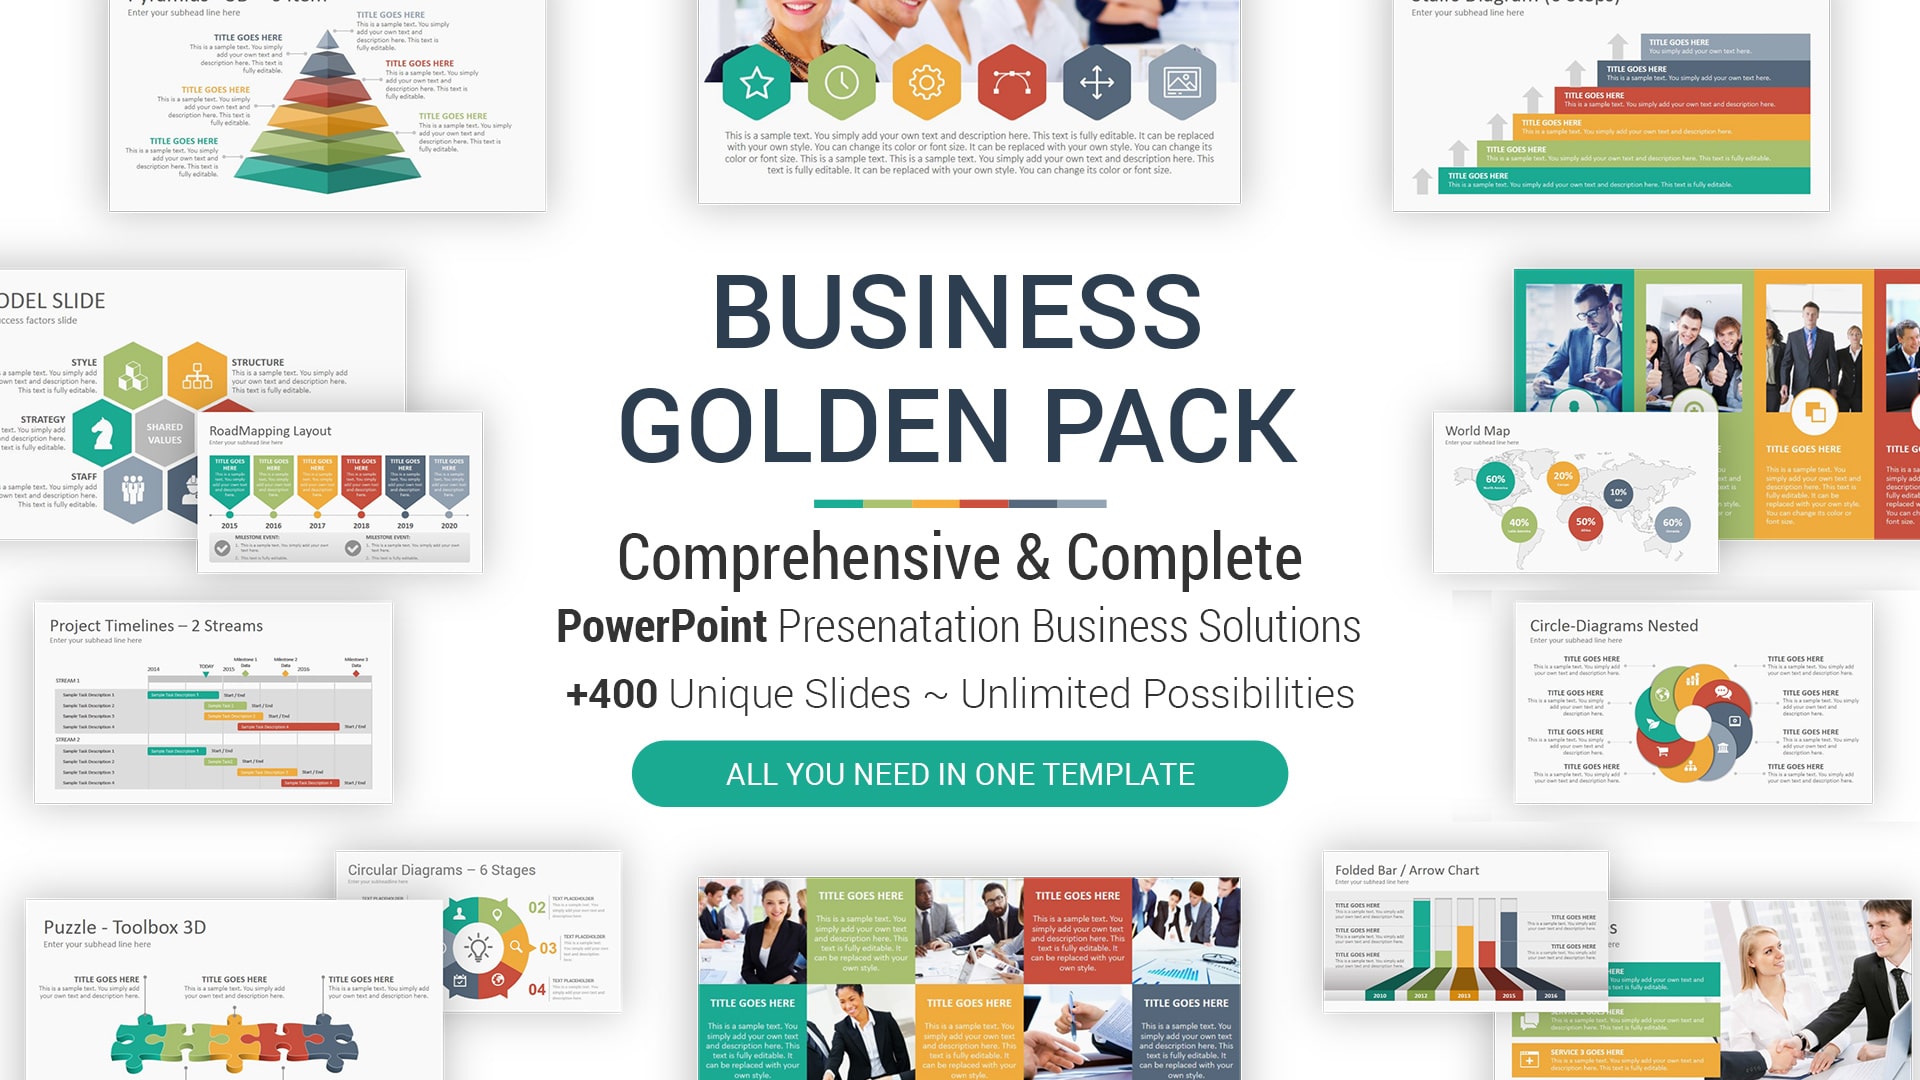 40+ Animated PowerPoint (PPT) Templates for Presentations, 2023 - SlideSalad